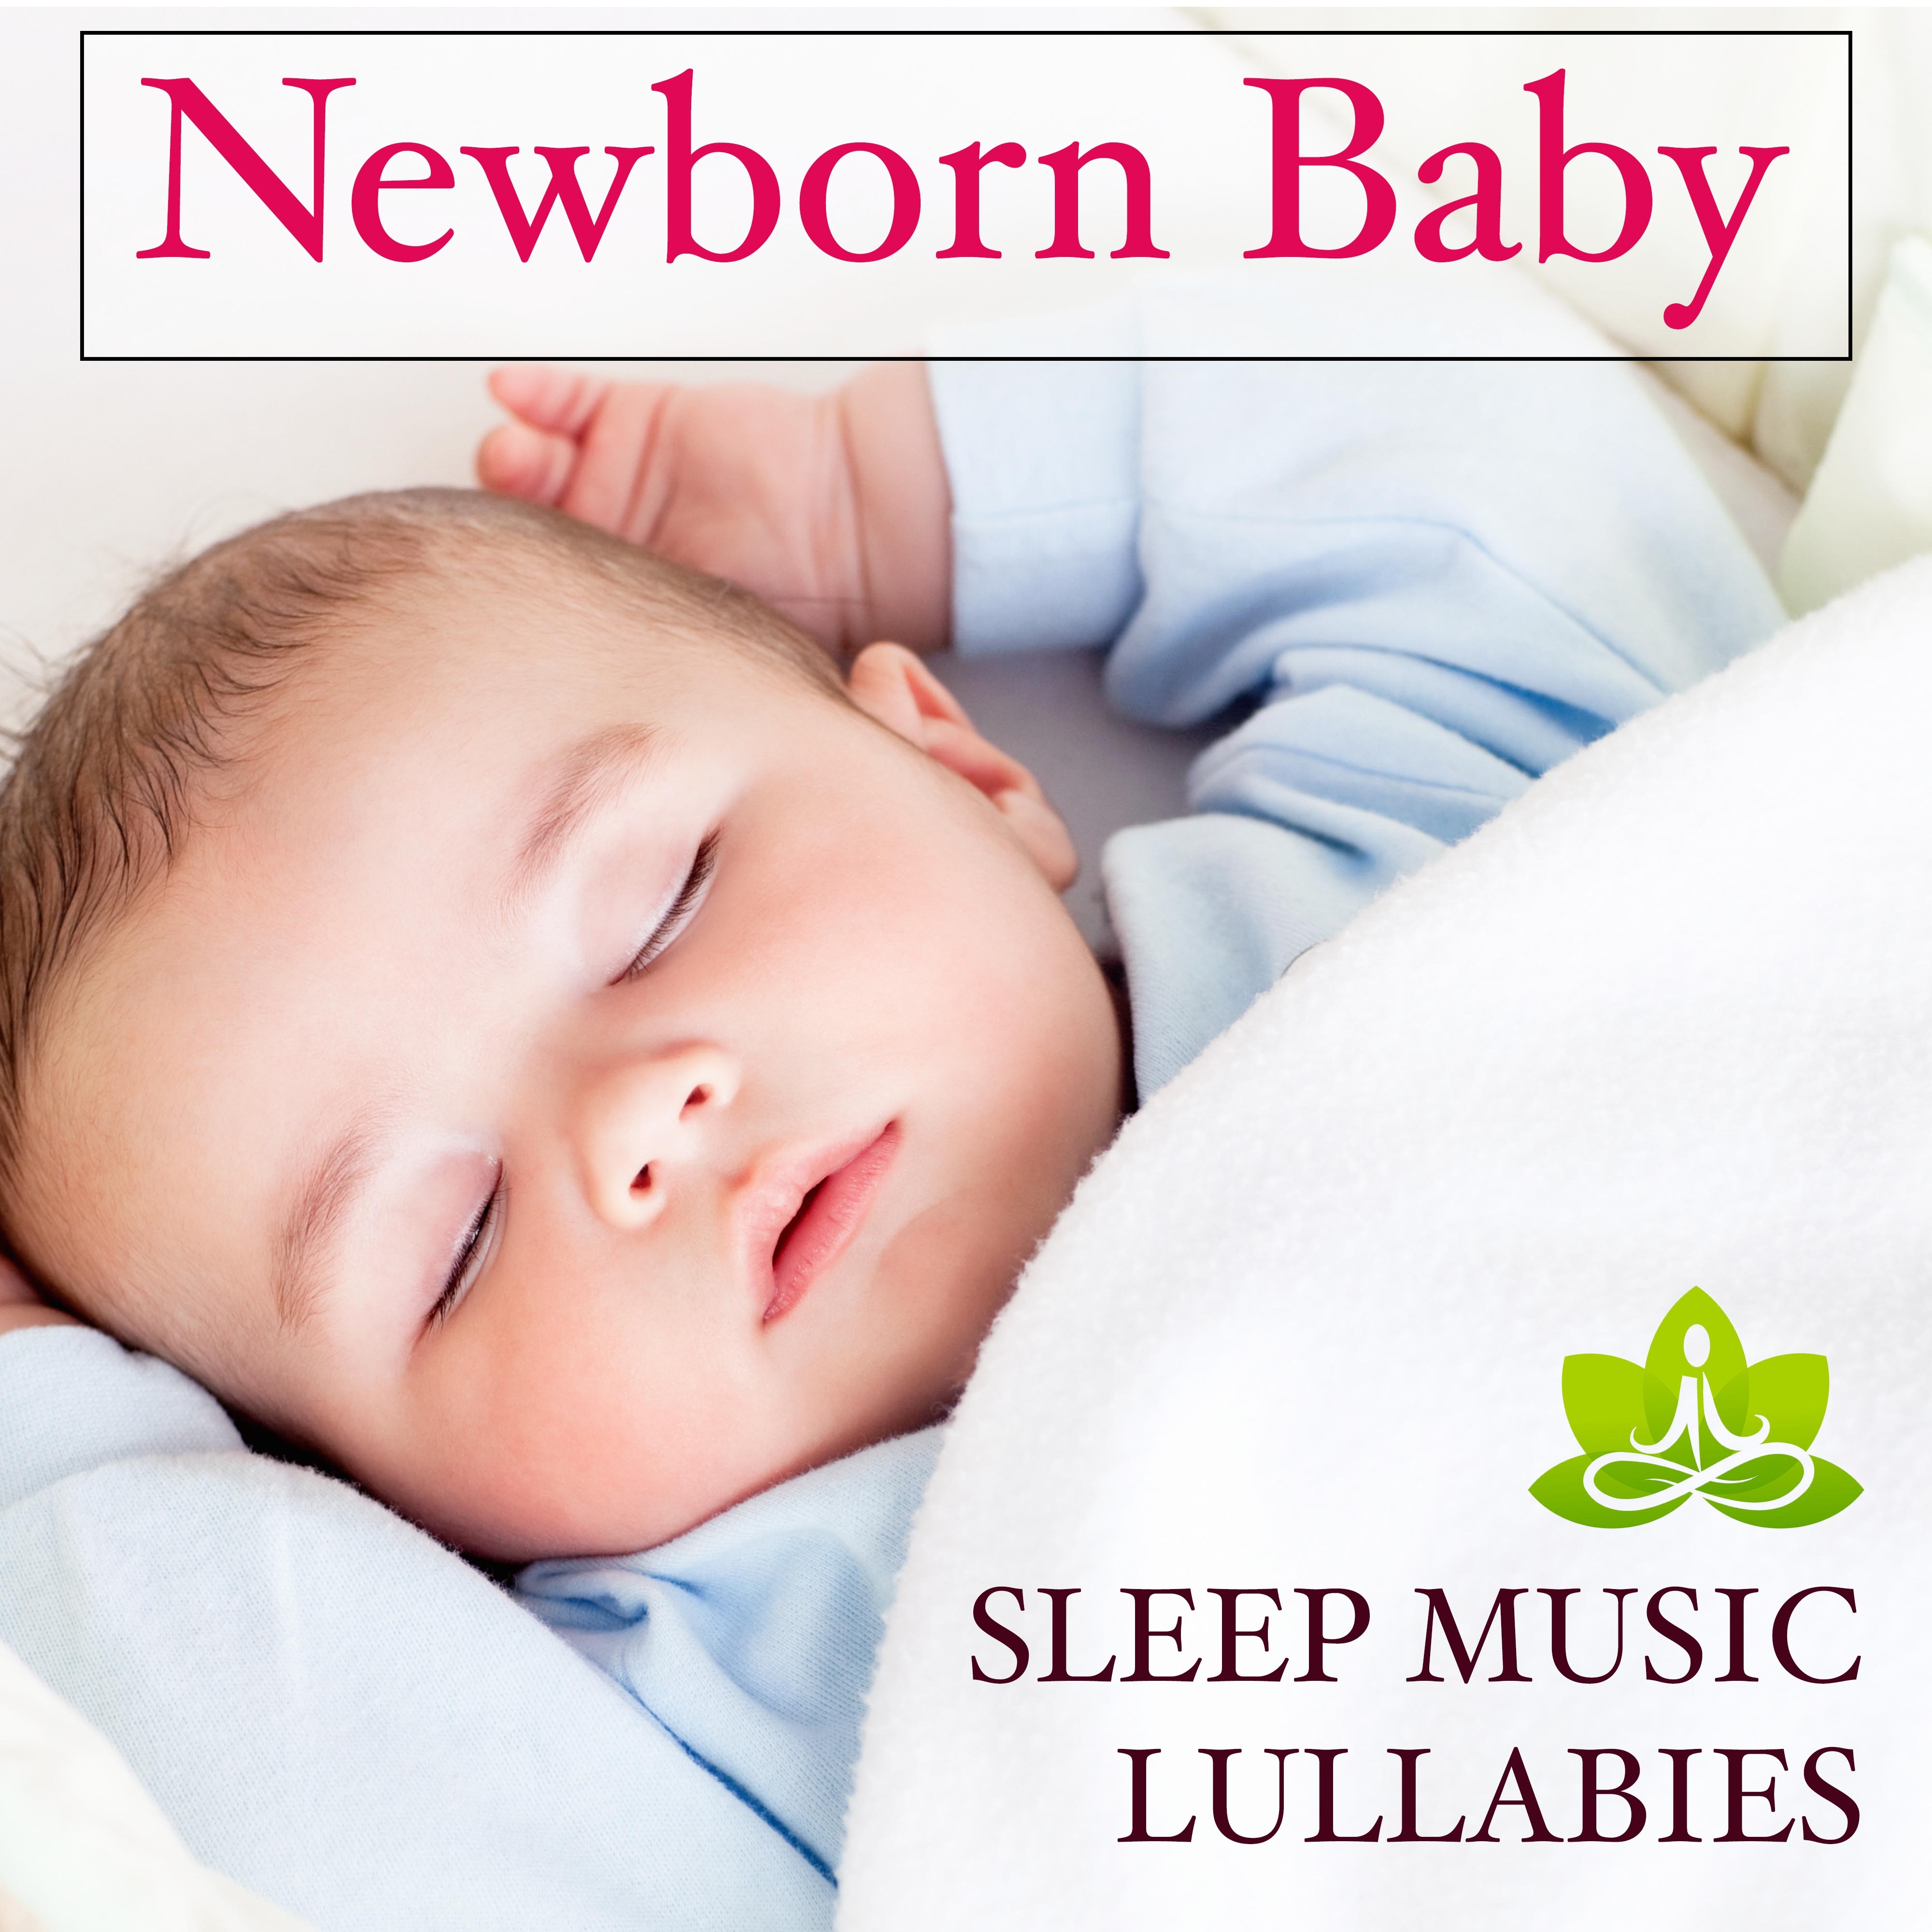 Newborn Baby: Baby Sleep Music Lullabies, Relaxing Sounds of Nature, Slow Music and Tibetan Lullaby Songs